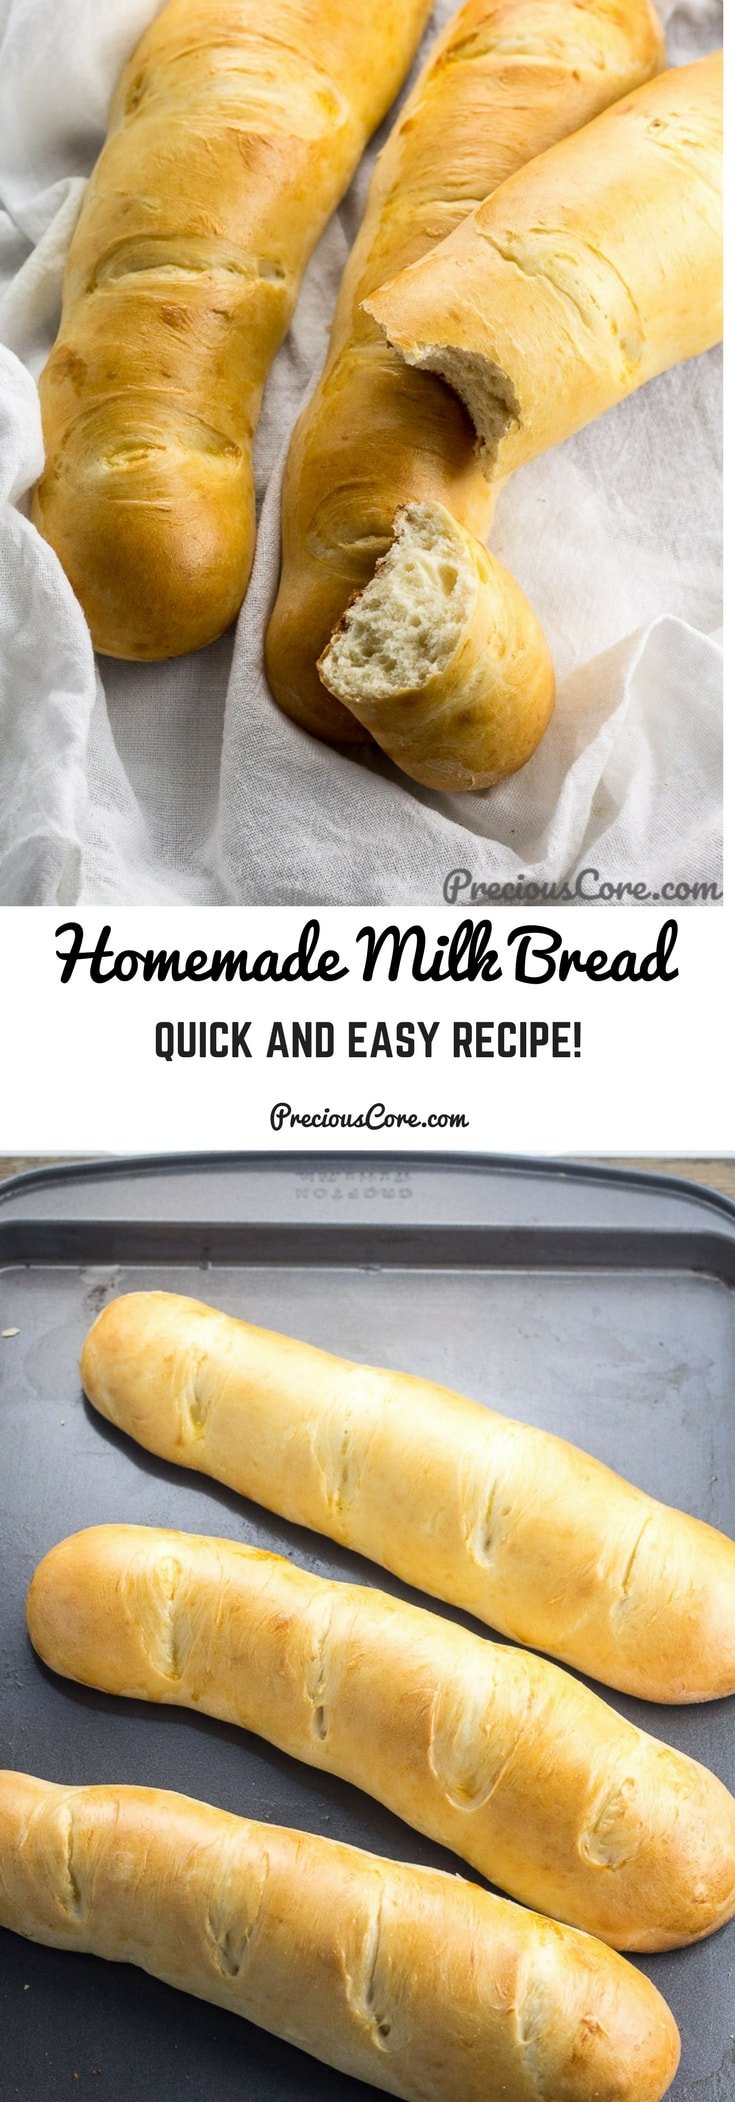 This homemade milk bread is quick, easy with very simple ingredients. Even a baking novice can nail this one! Enjoy this simple homemade bread recipe. Get the recipe on Precious Core. #baking #bread #homemade